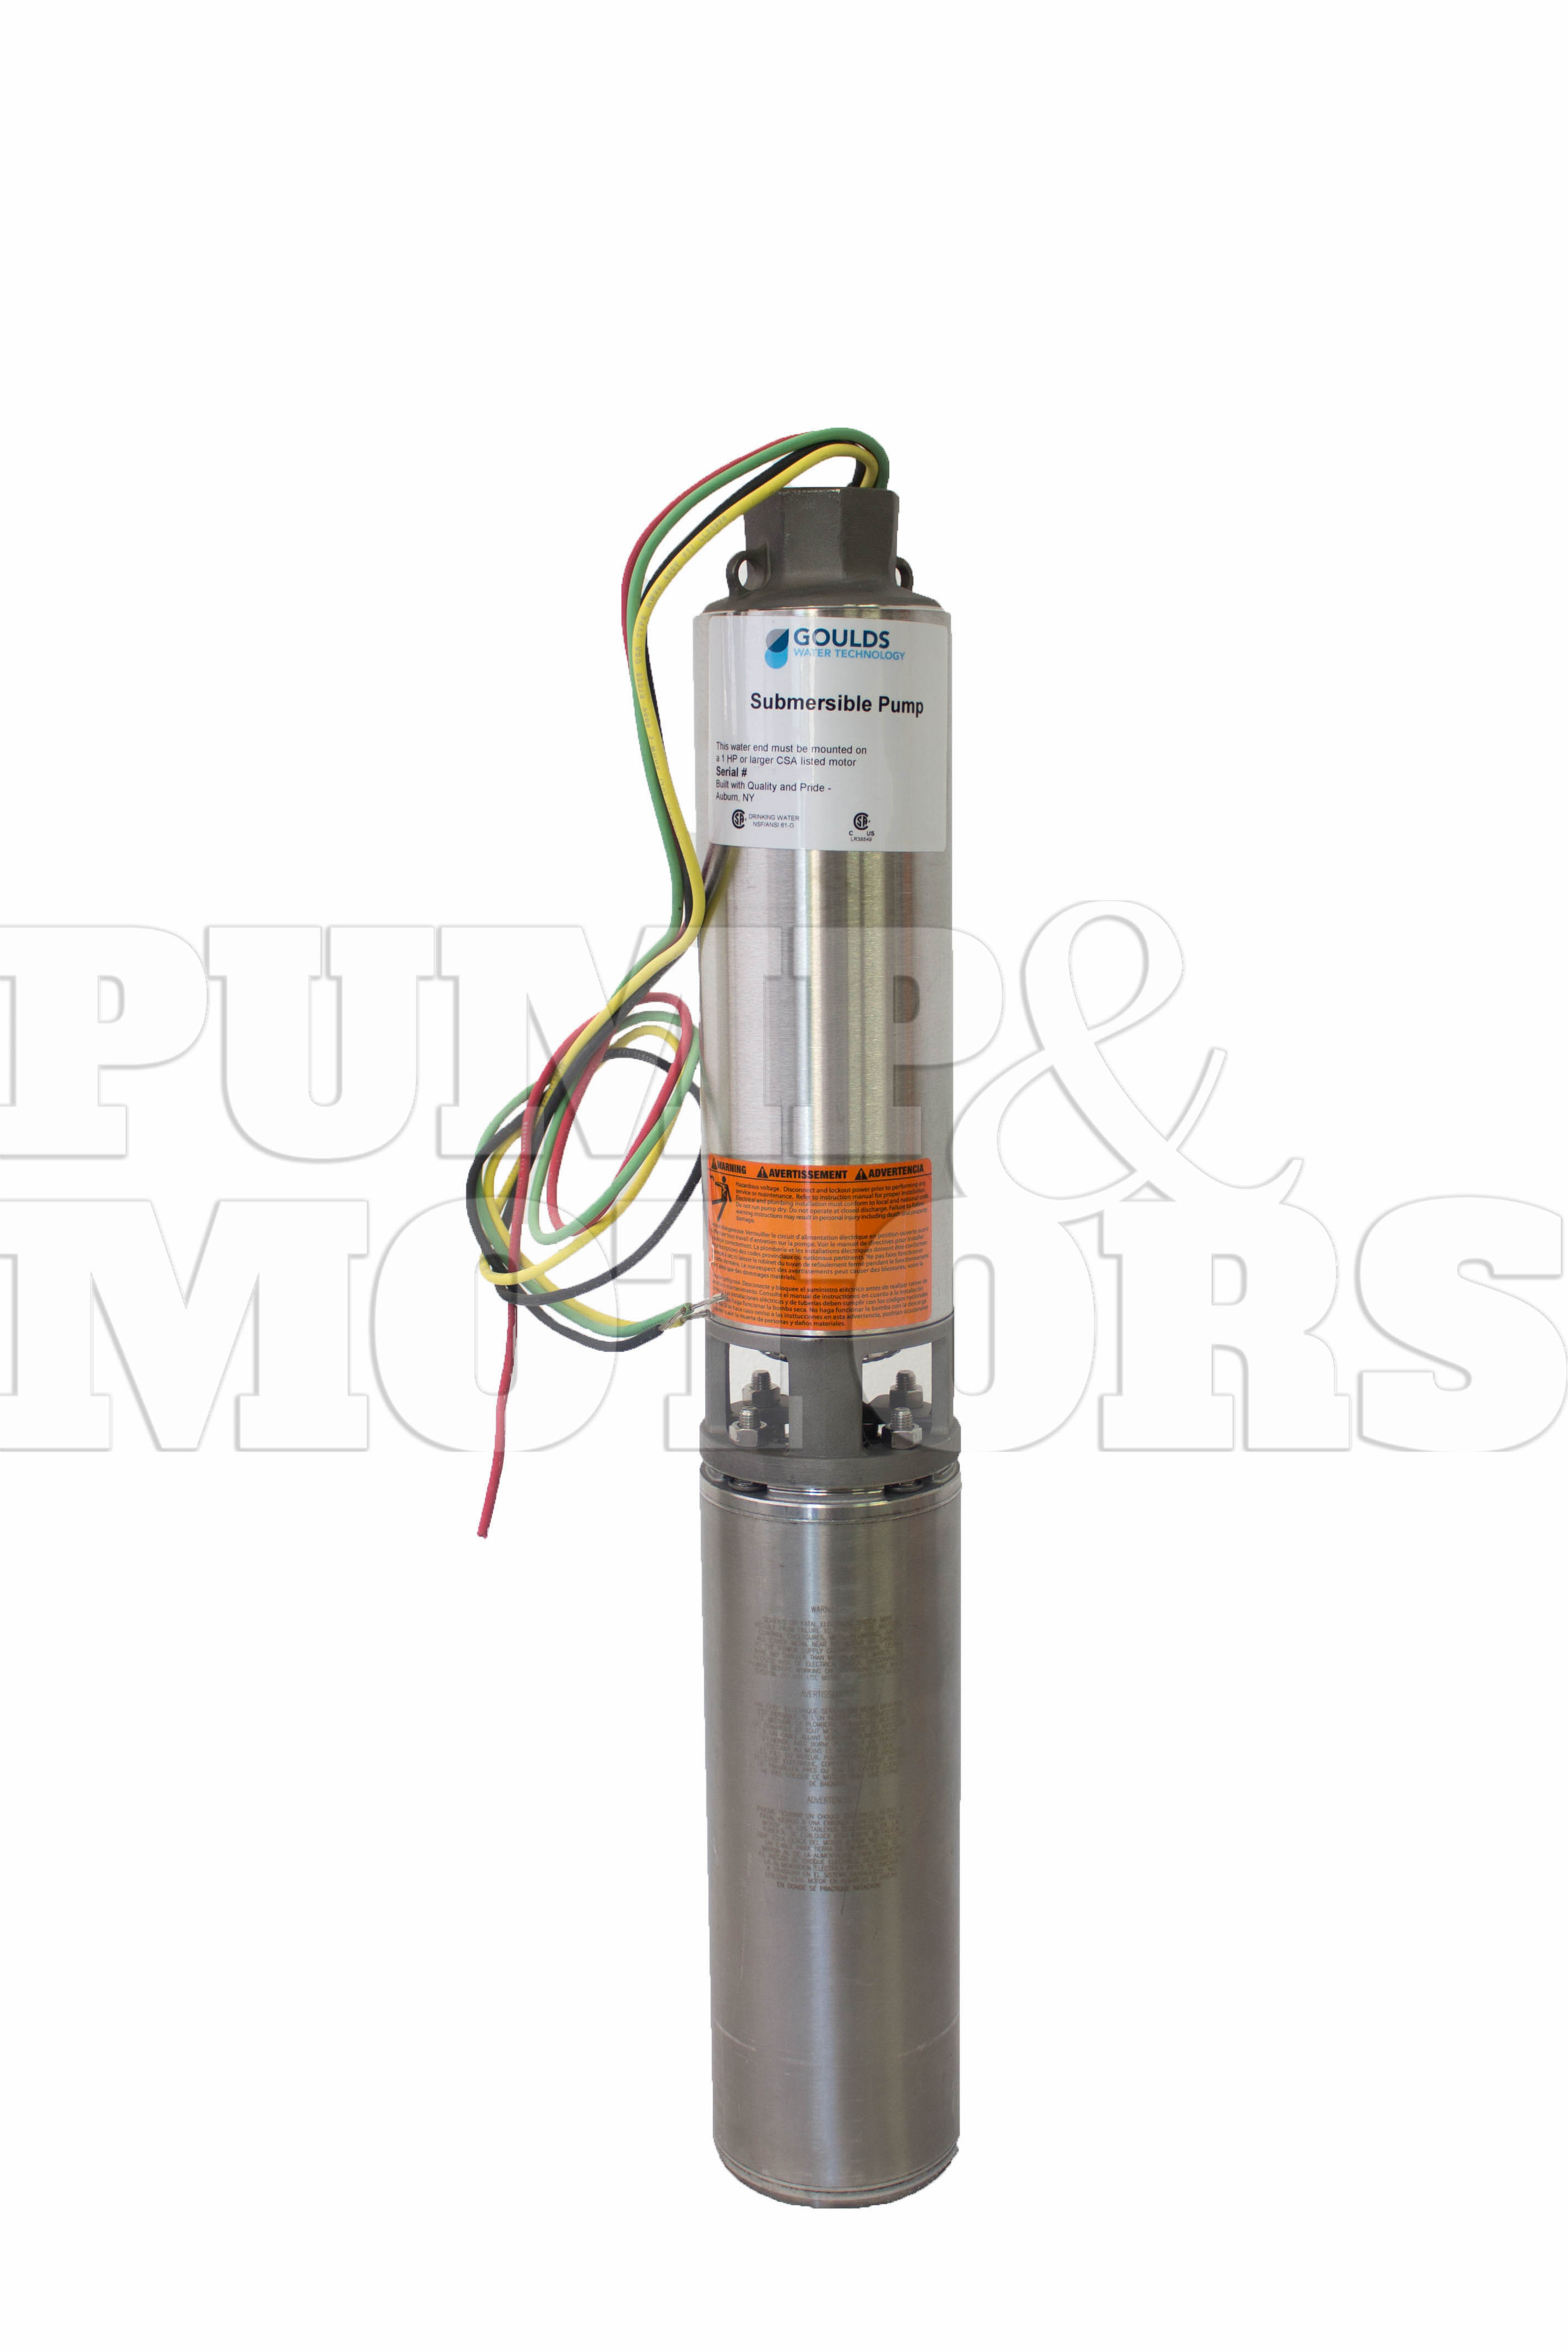 Goulds 10GS10412CL 1HP 230V Submersible Water Well Pump 10GPM